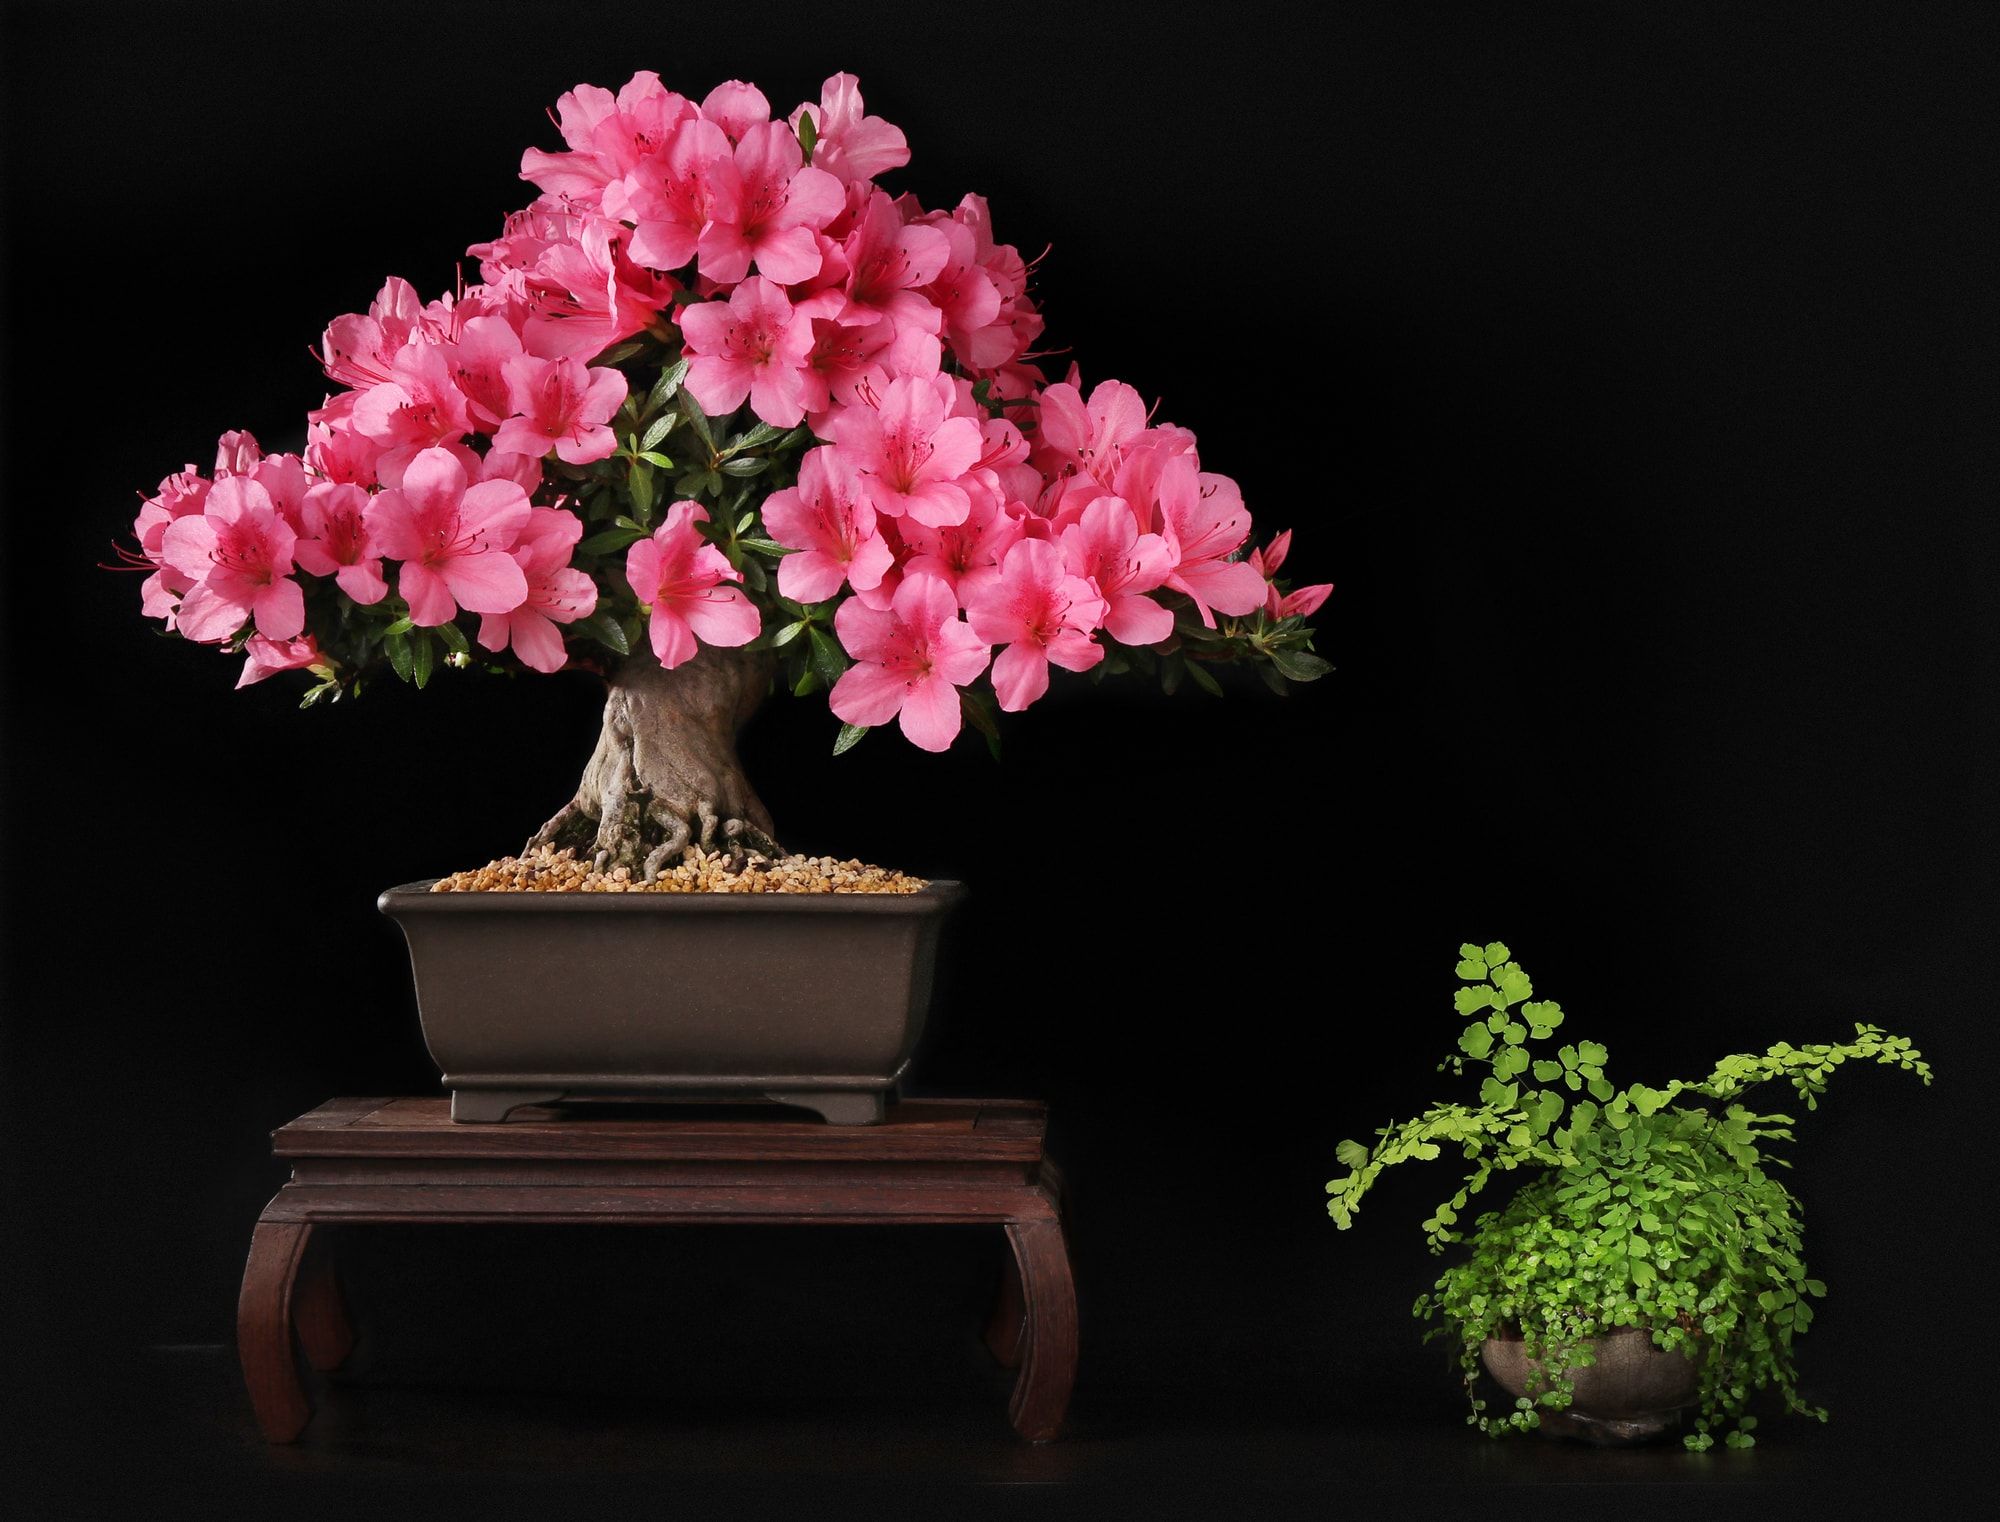 Azalea bonsai blooming with pink flowers planted in a modern type of rectangular pot elevated by a table like structure with another plant on a pot by its side in the plain ground